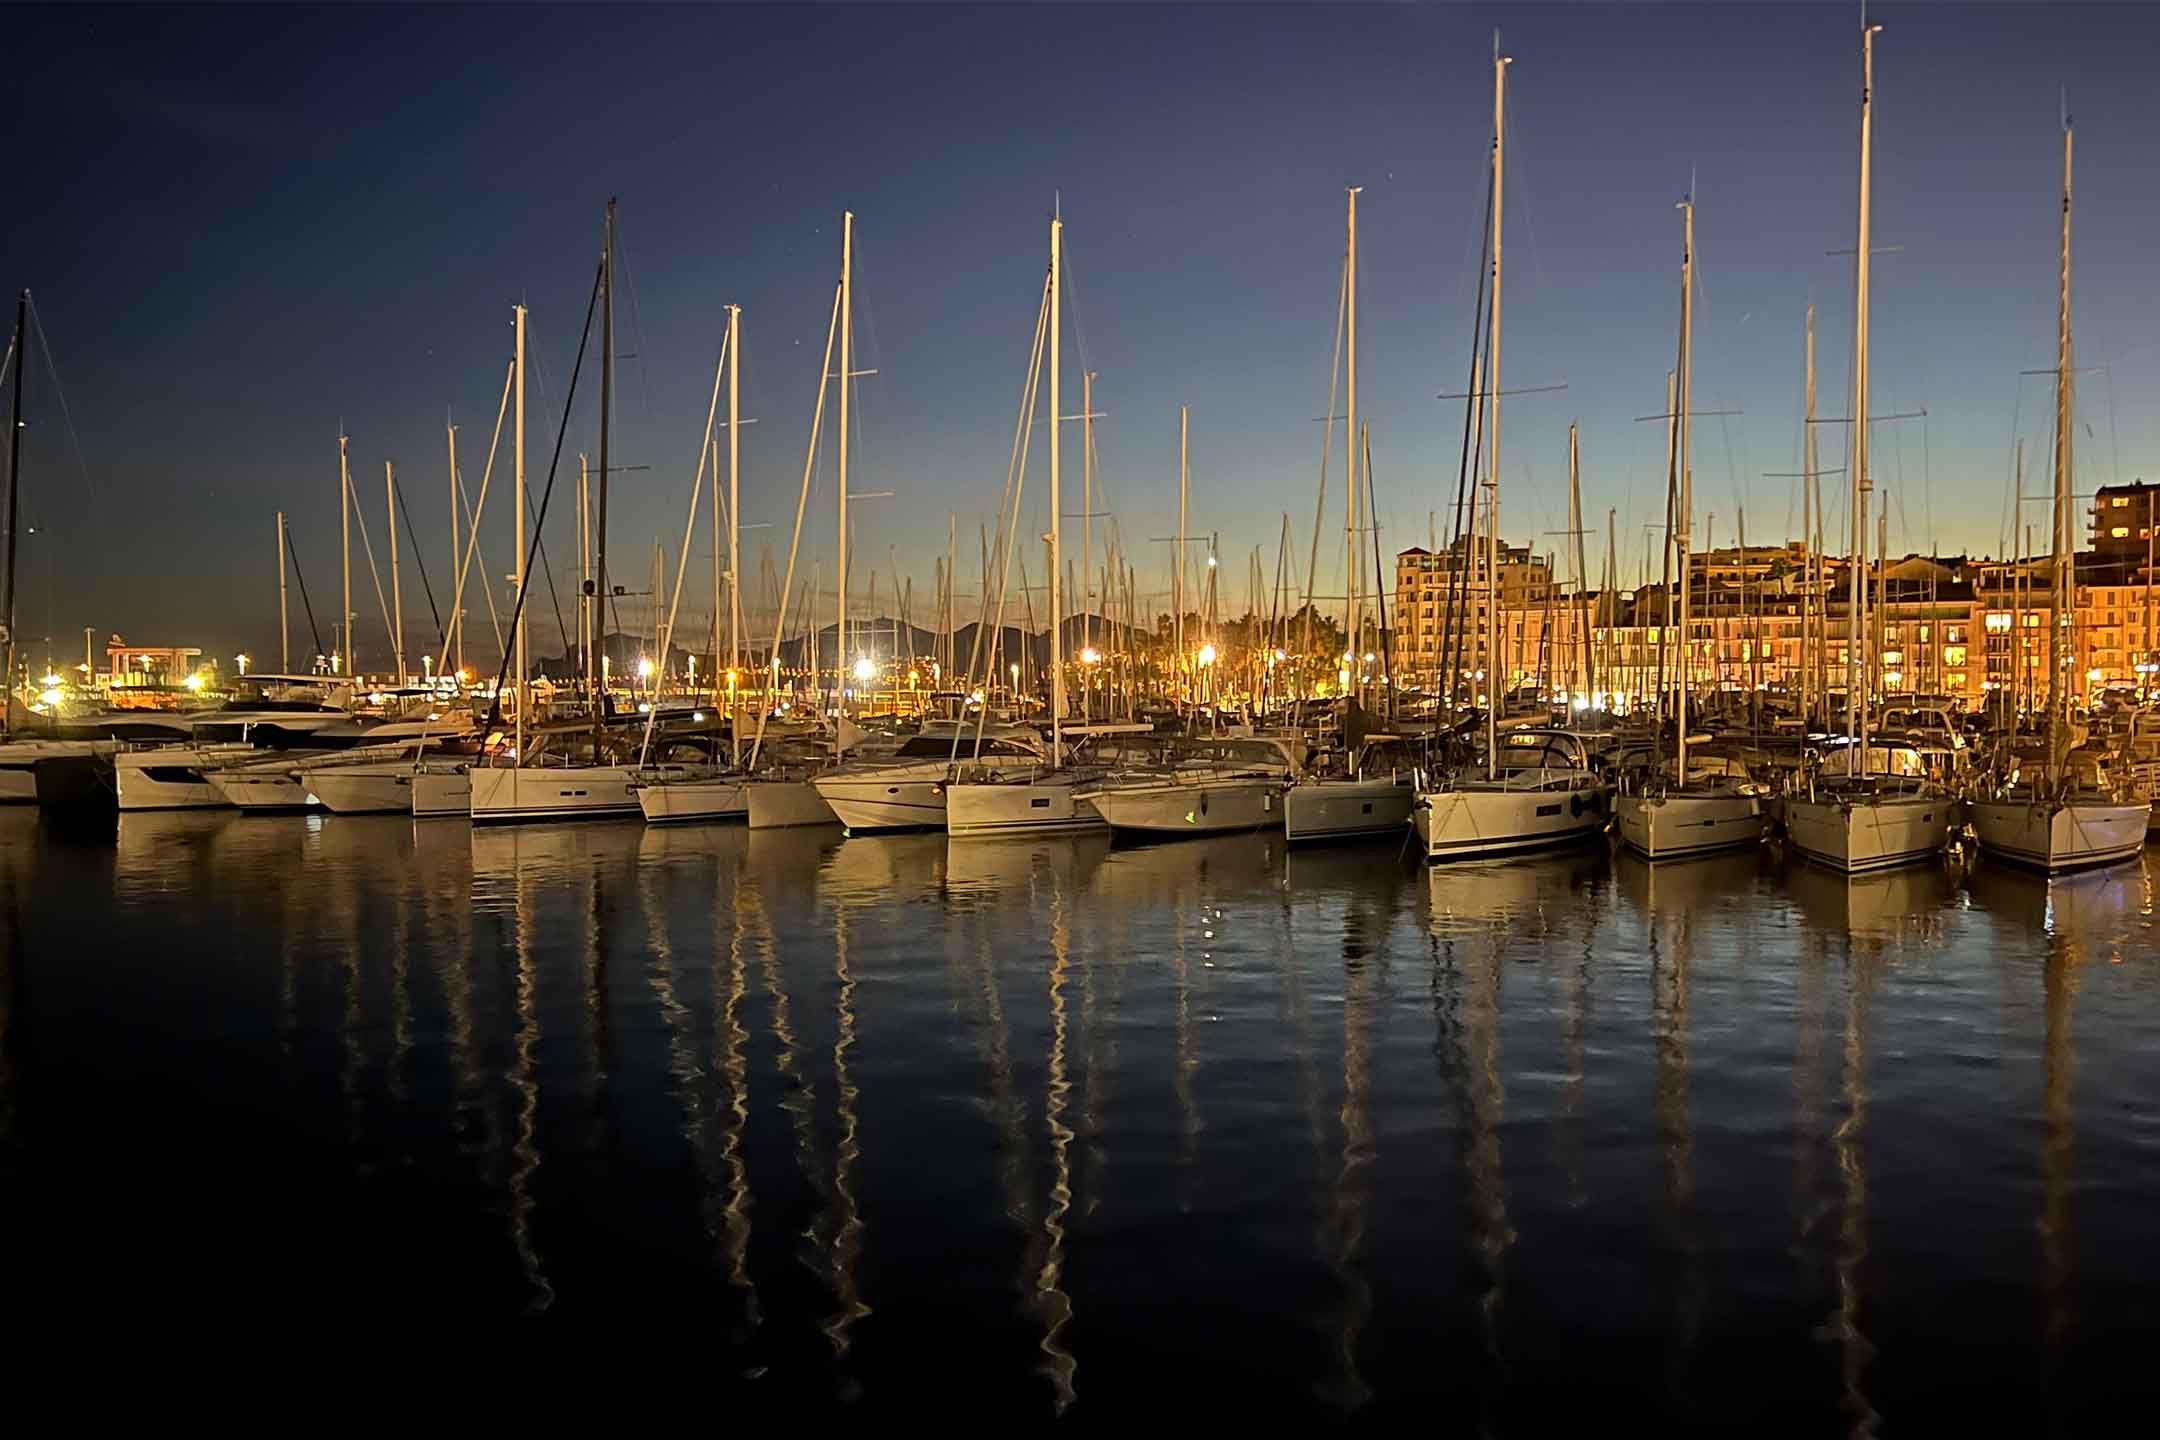 Photos of yachts in the port of Cannes, France with the evening sun set in the background.